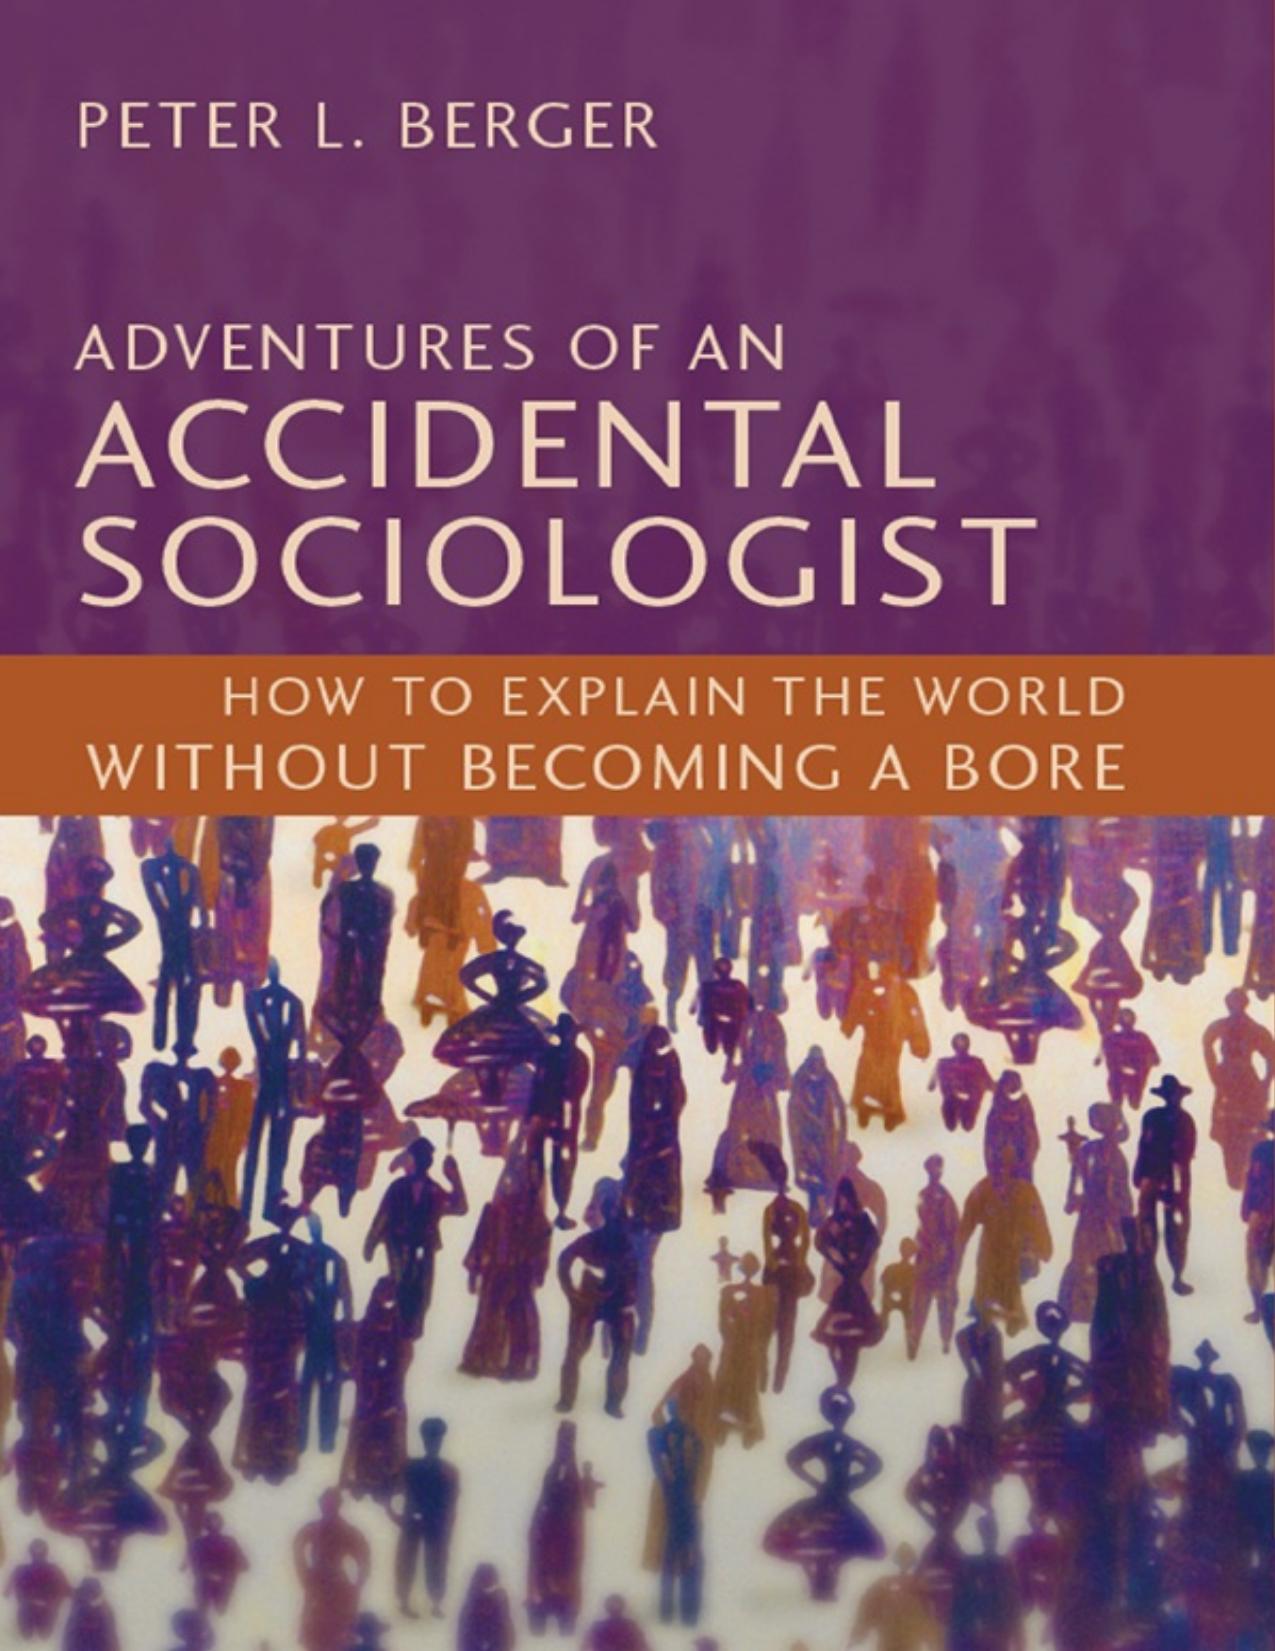 Adventures of an Accidental Sociologist: How to Explain the World Without Becoming a Bore - PDFDrive.com